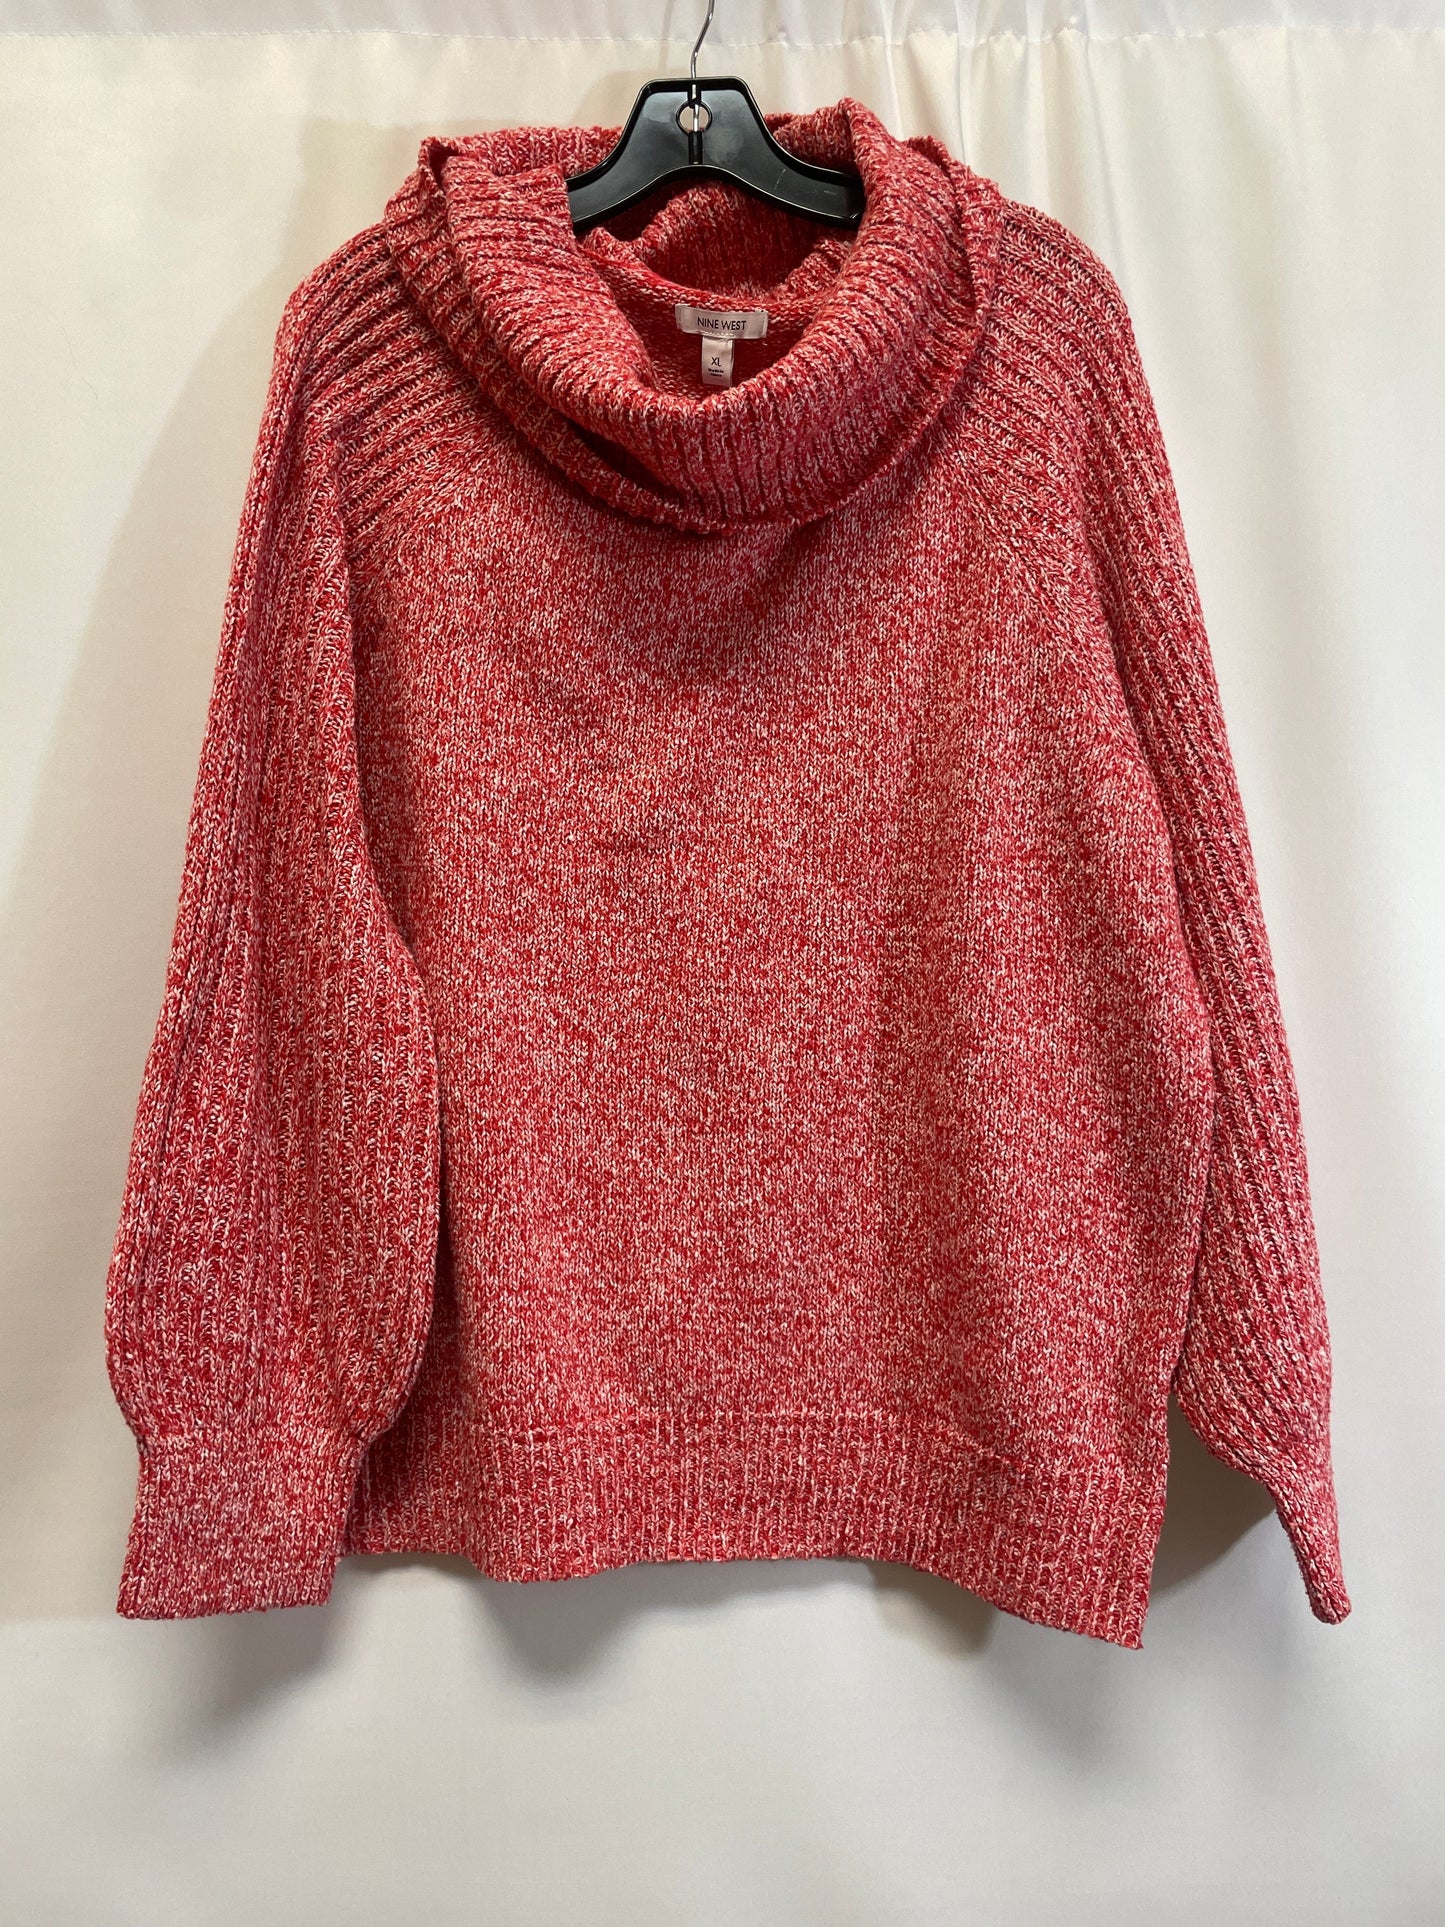 Red Sweater Nine West, Size Xl